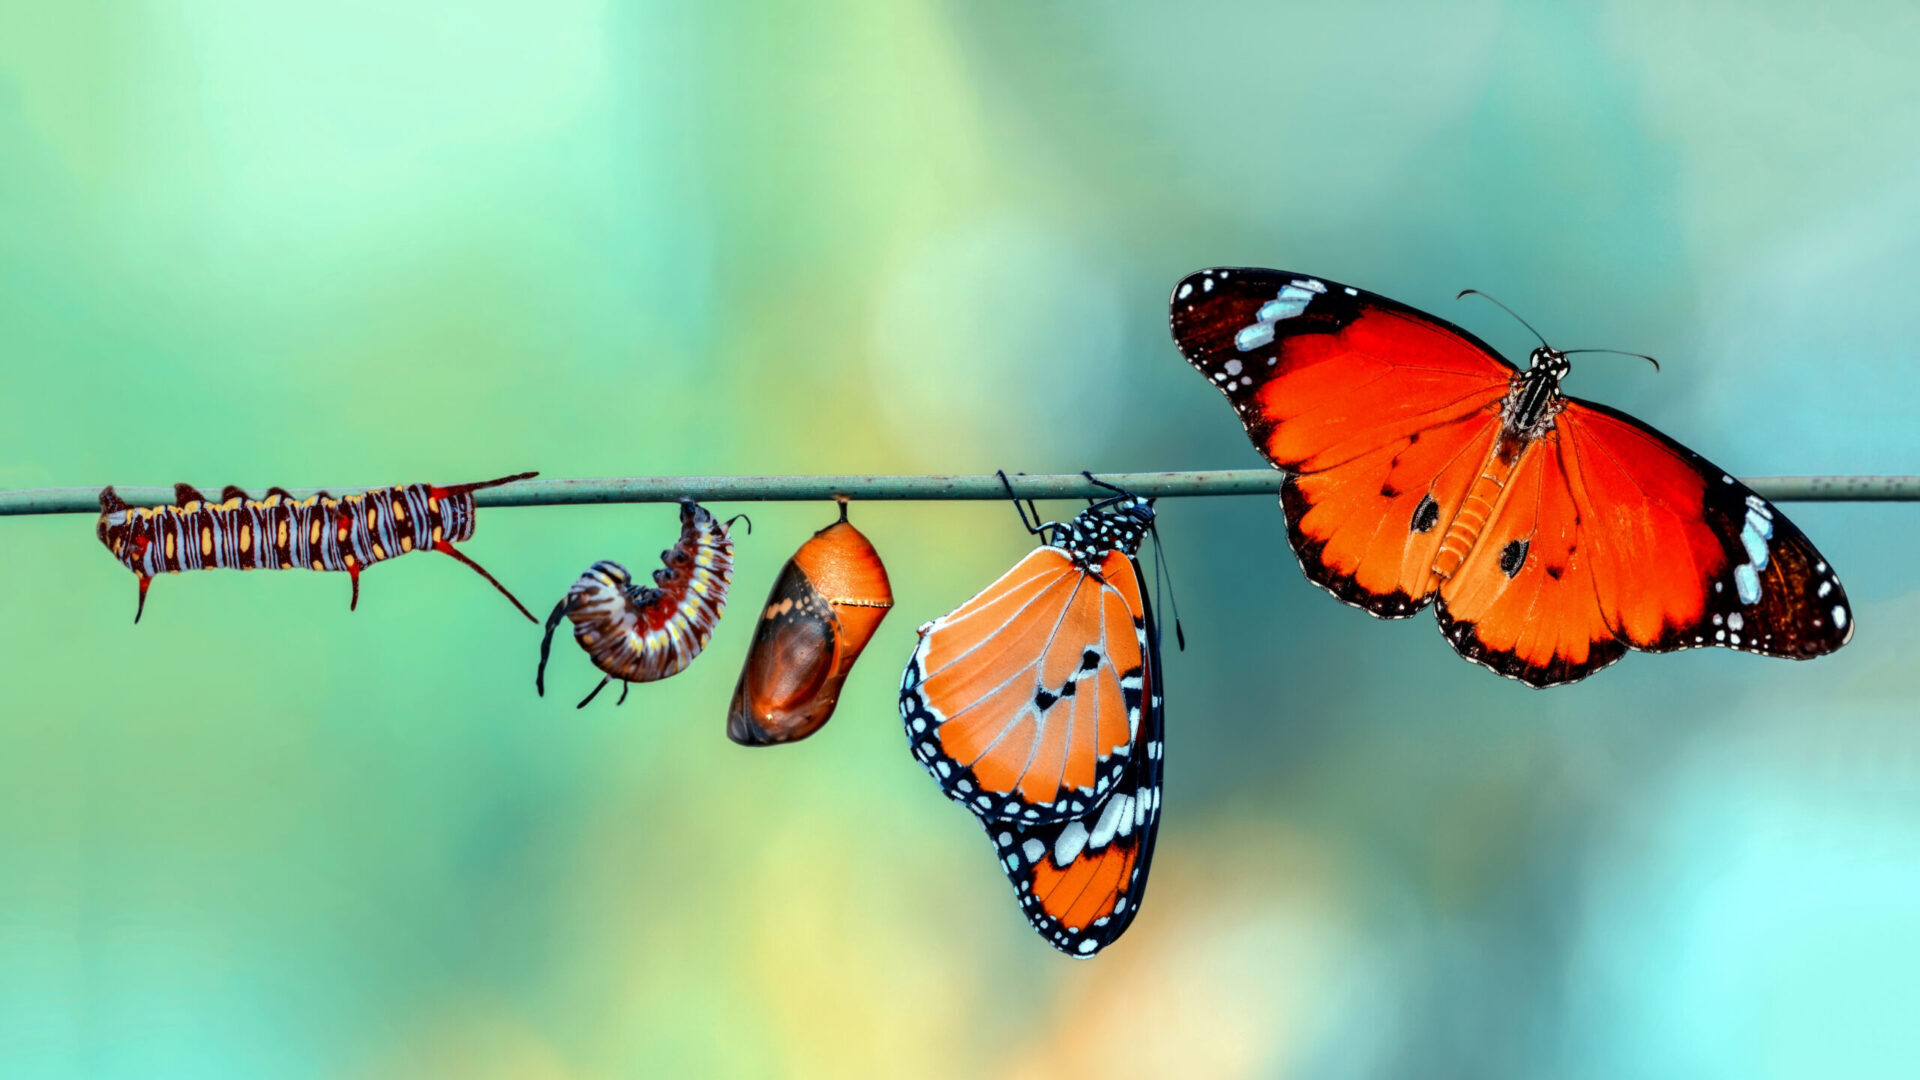 lifecycle marketing - catterpiller to butterfly